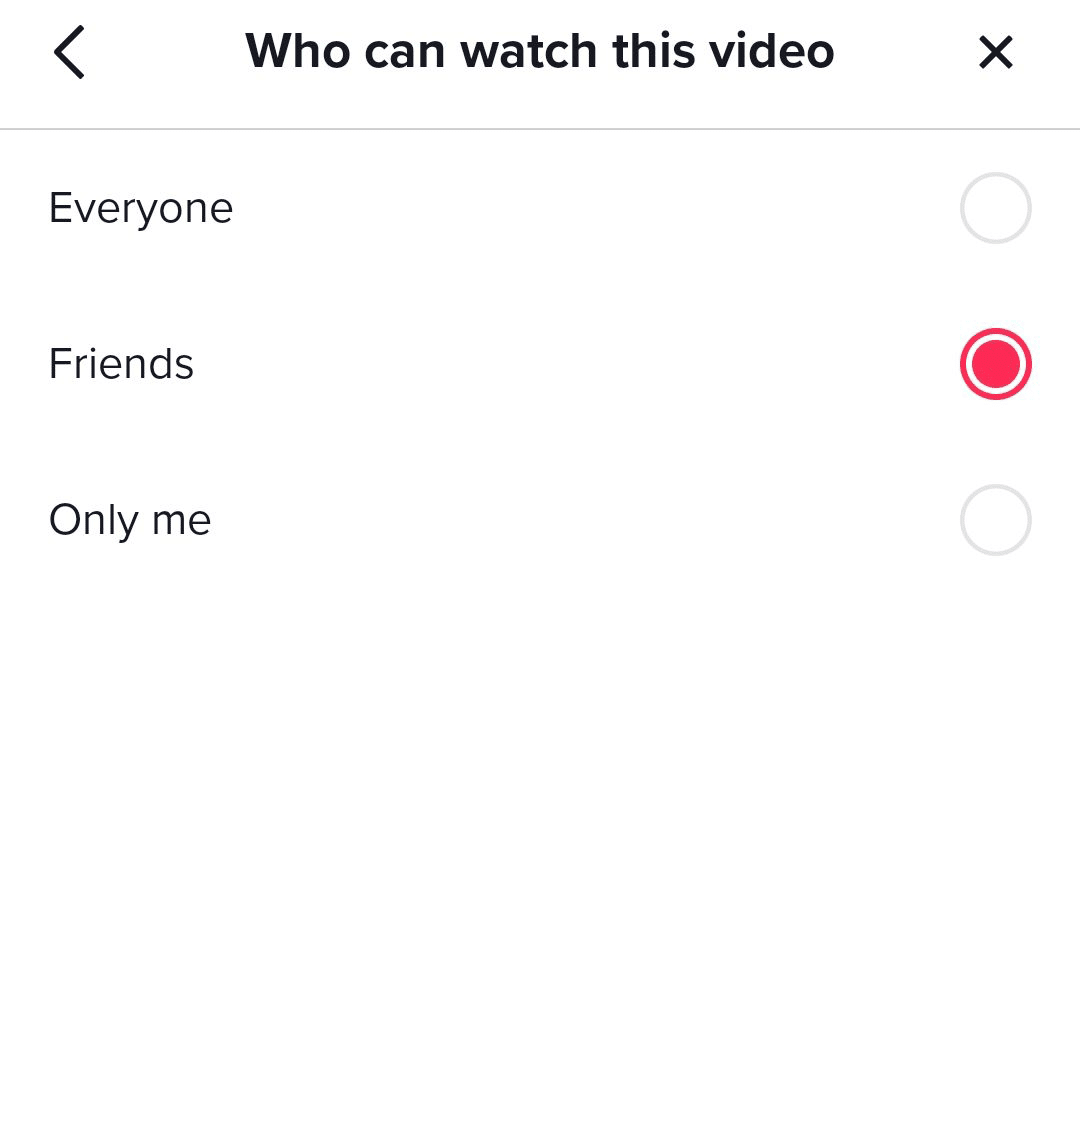 tiktok privacy settings who can watch this video options